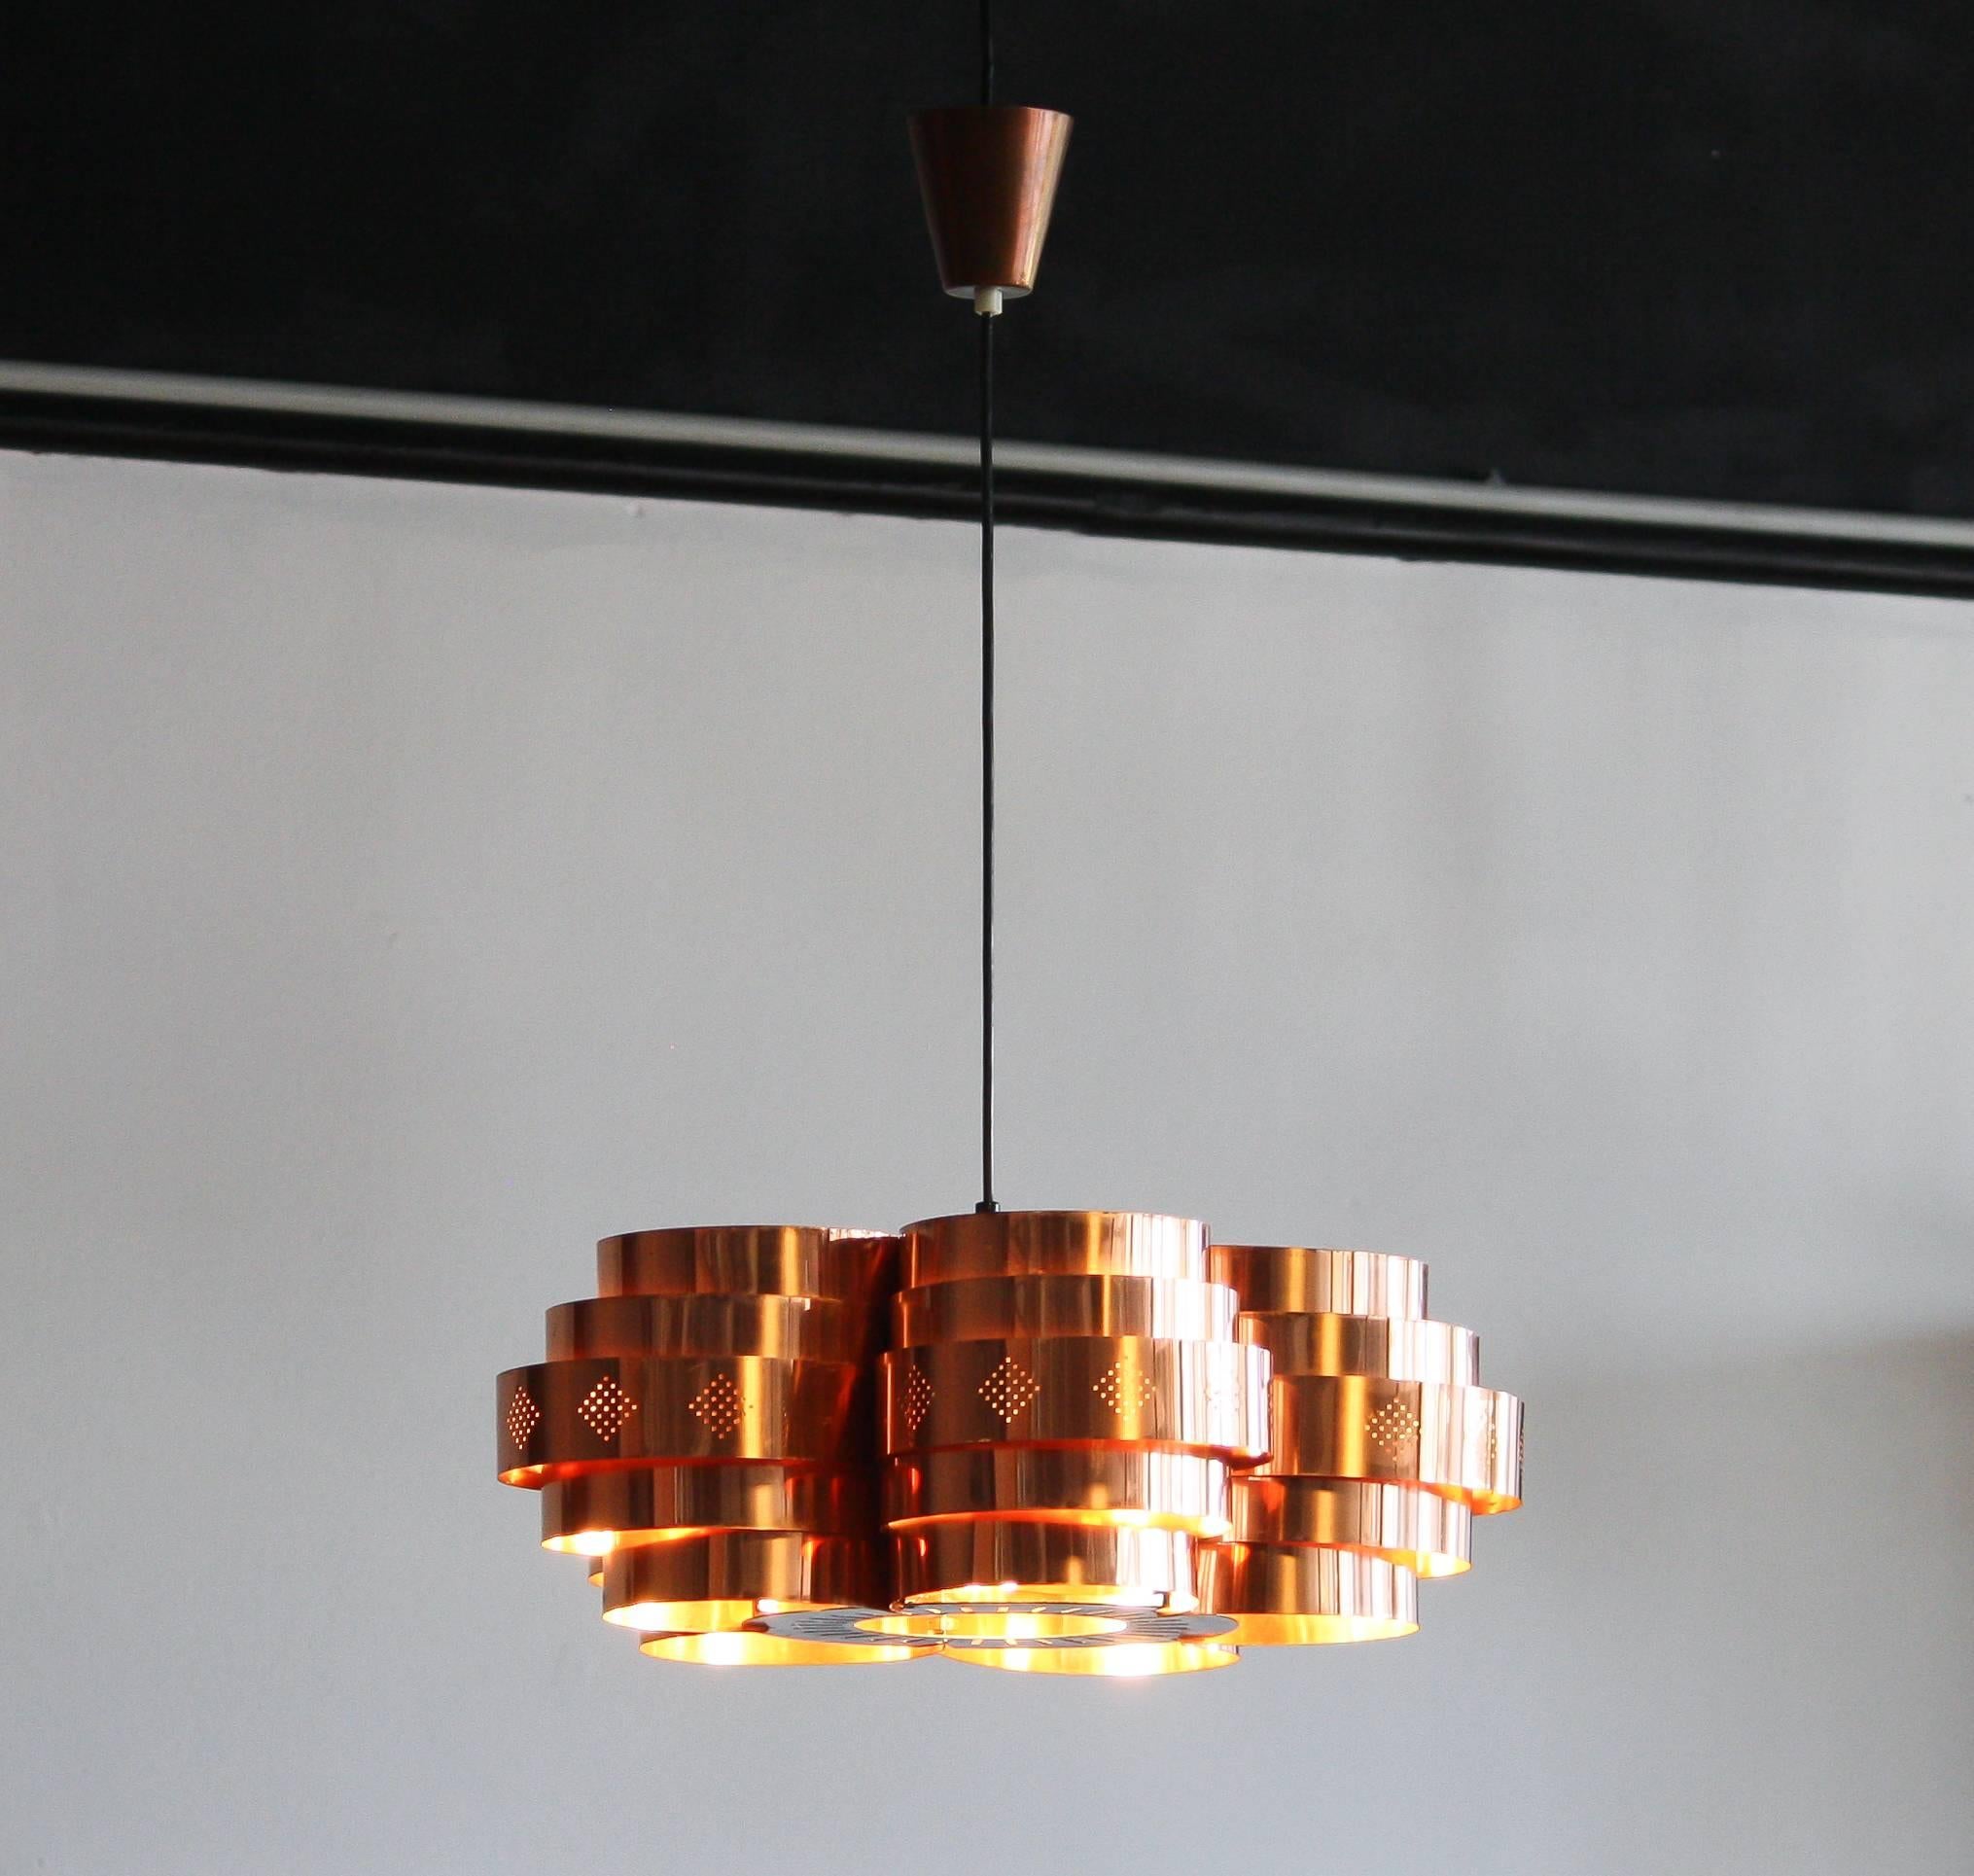 Beautiful copper pendant designed by Verner Schou and manufactured by Coronell Elektro, Denmark.
The lamp has a fabulous four leaf clover shape with five variable tiers with give a warm diffused lighting.
Period 1960s
Dimensions: H 19 cm, ø 50 cm.